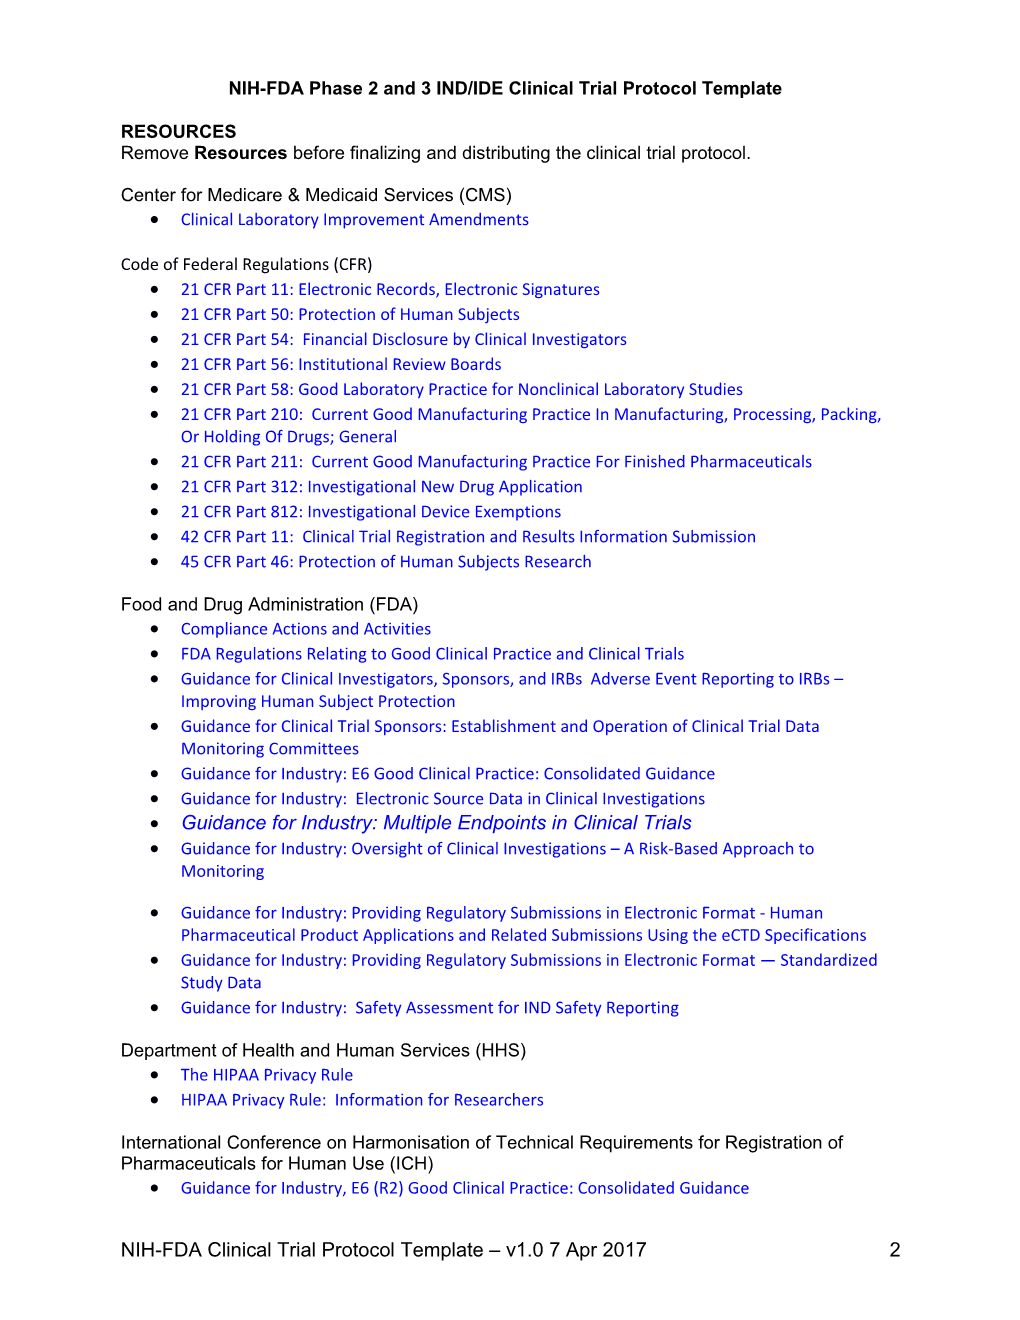 NIH-FDA Phase 2 and 3 IND/IDE Clinical Trial Protocol Template